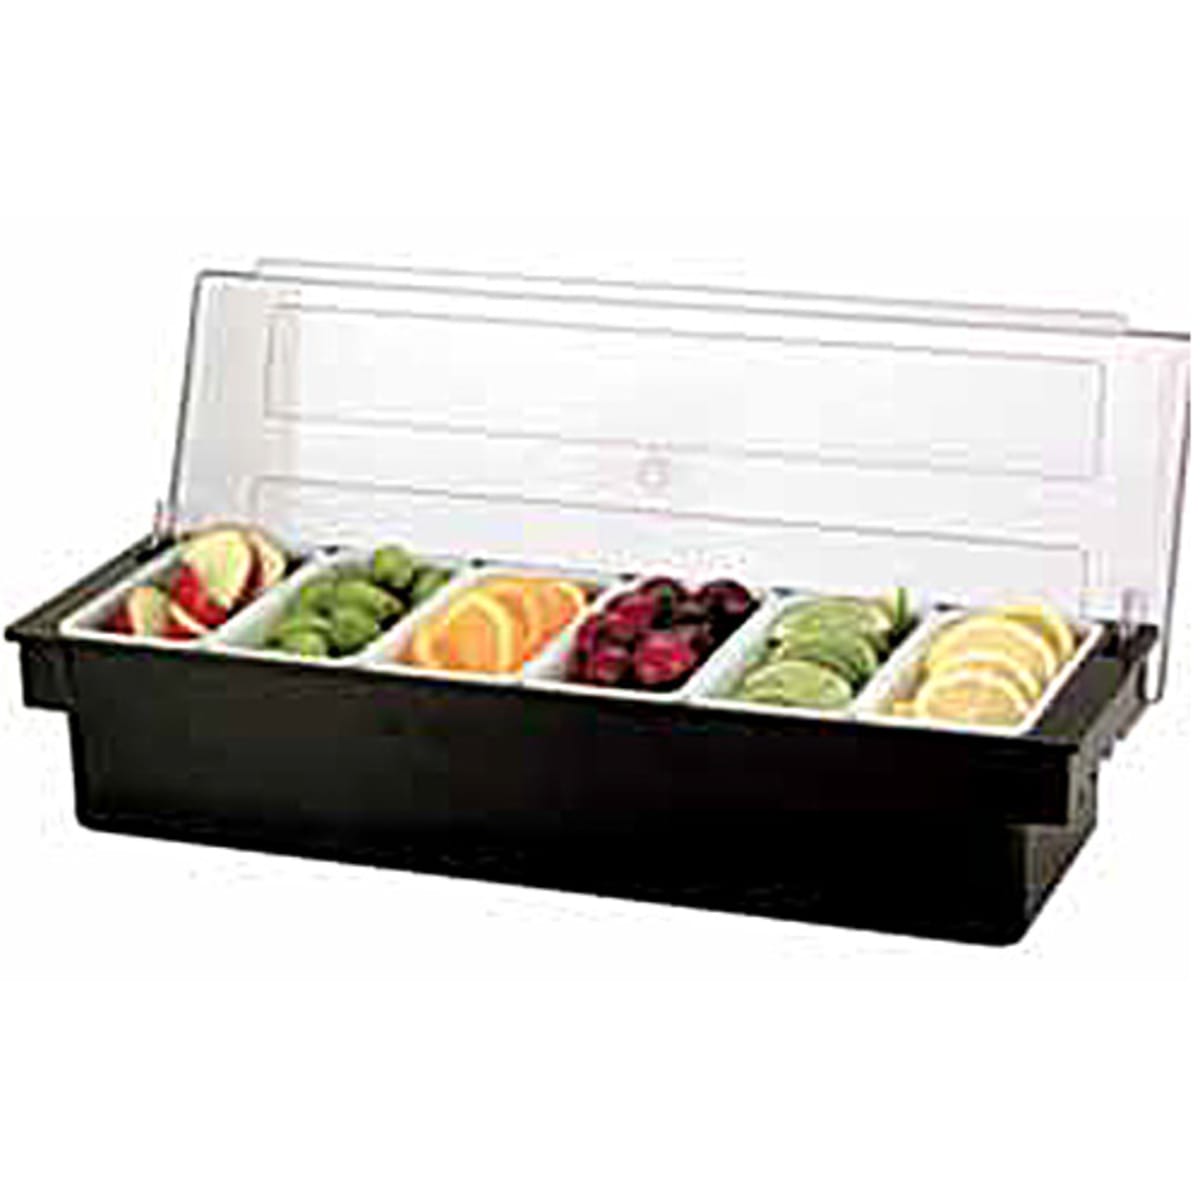 Matfer - Spice box 6 containers